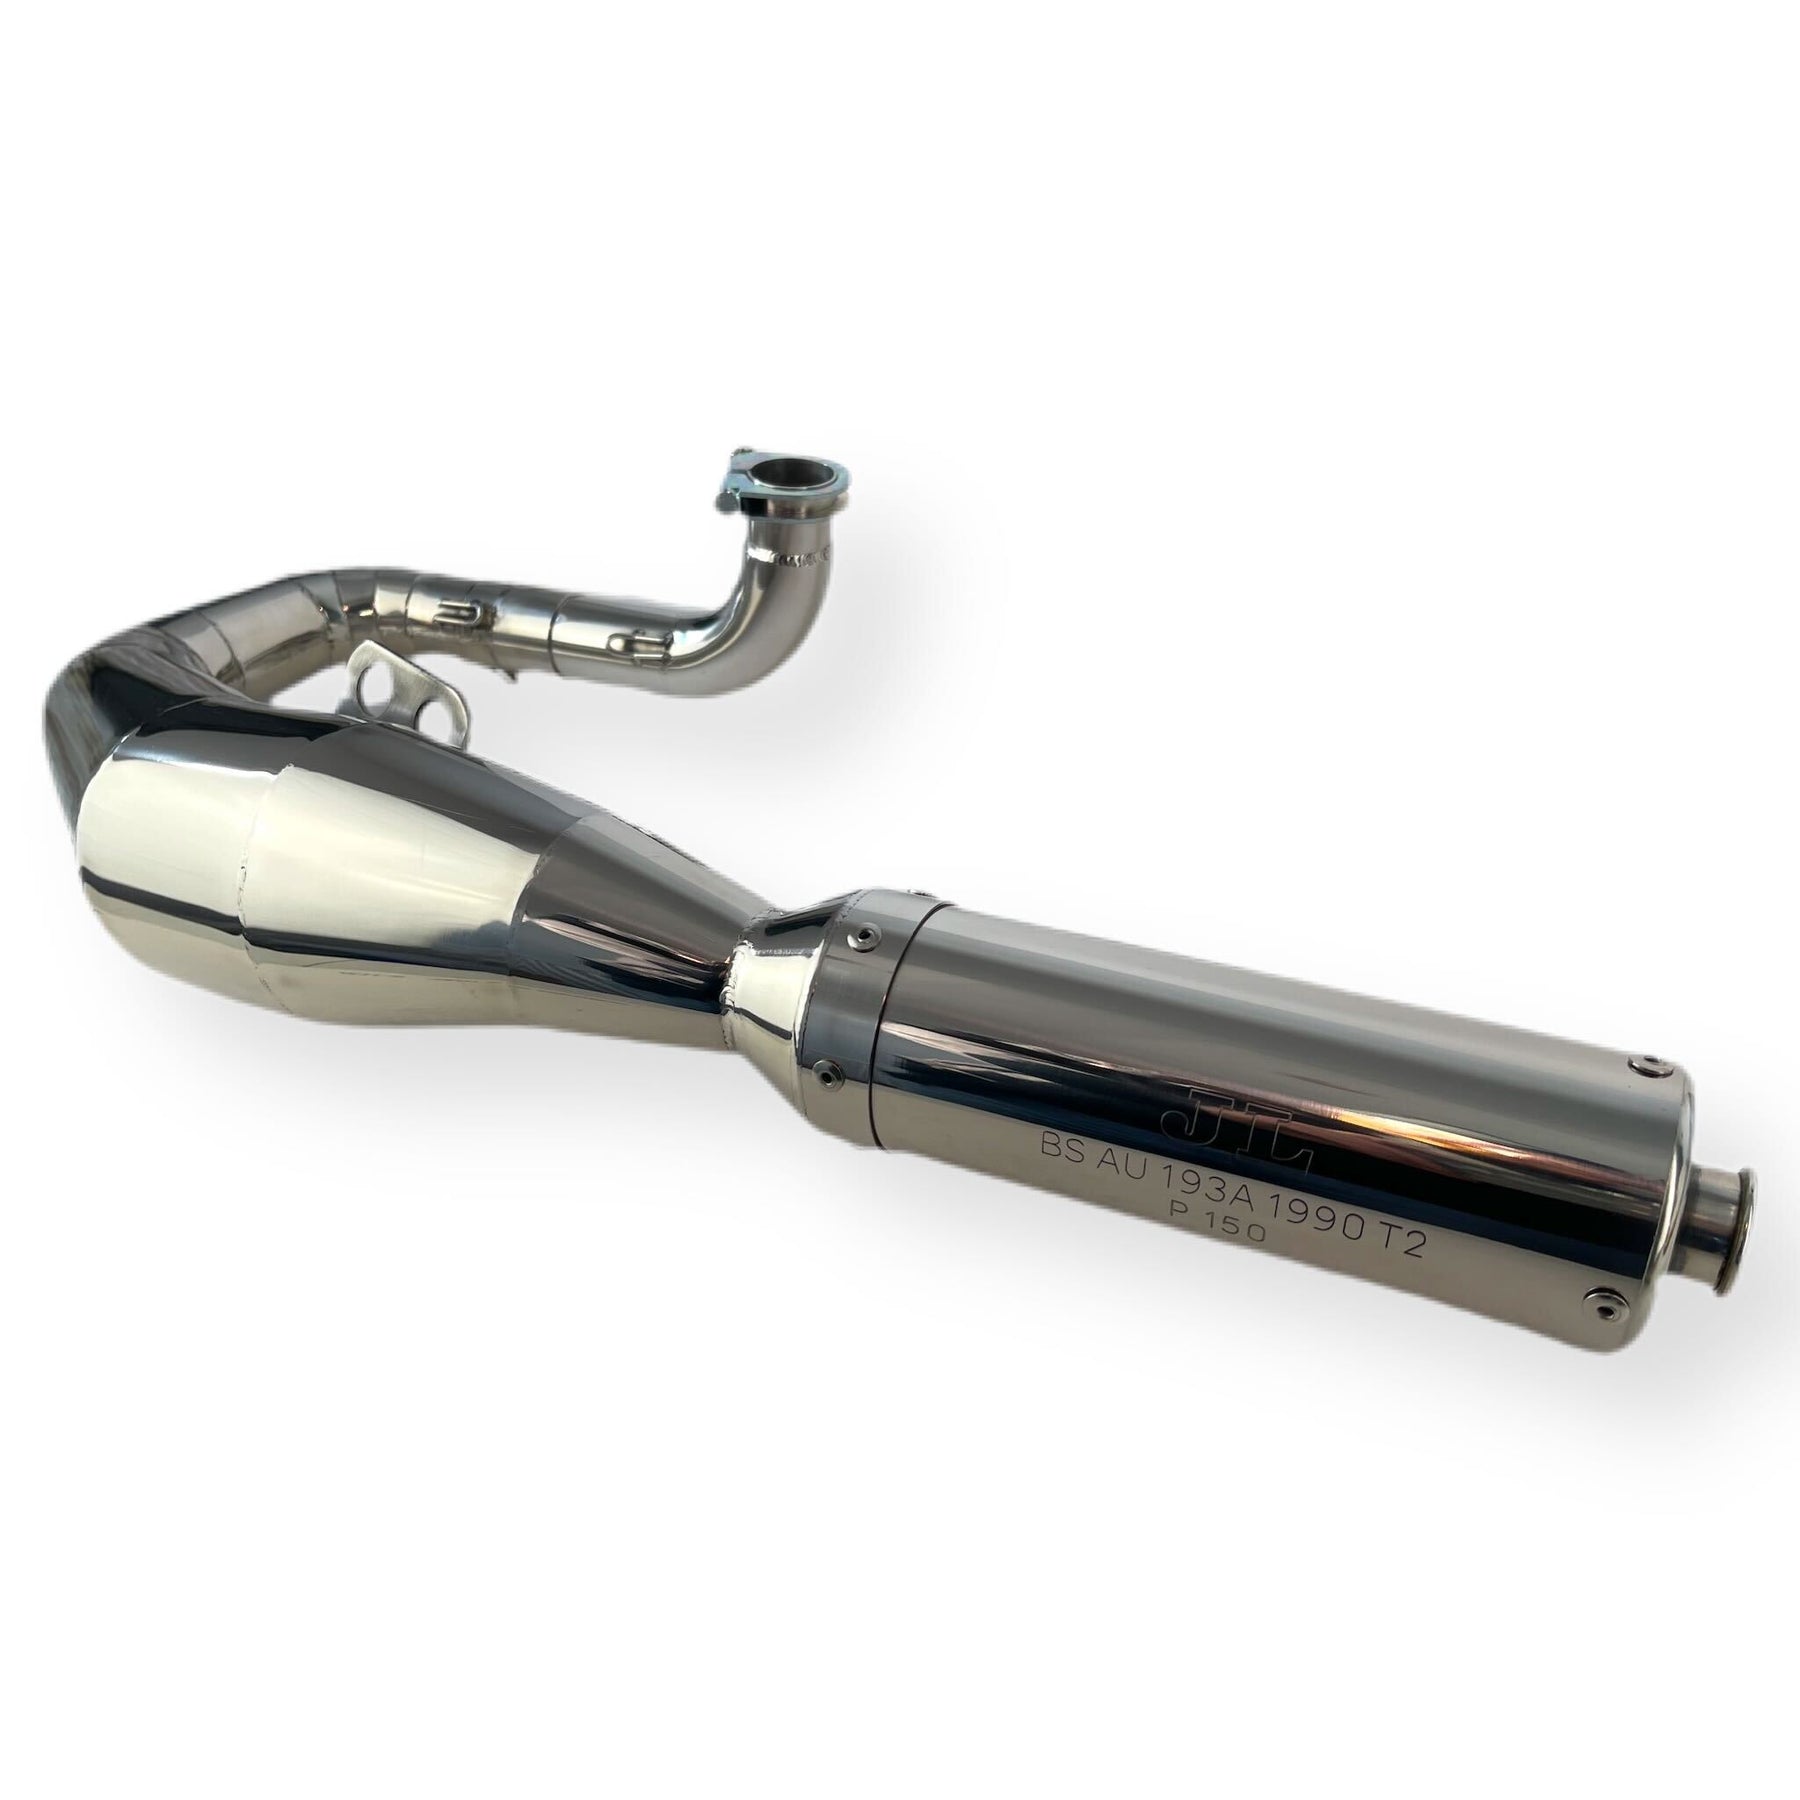 Vespa PX125 150 166 Jim Lomas JL Style Expansion Exhaust - Stainless Steel